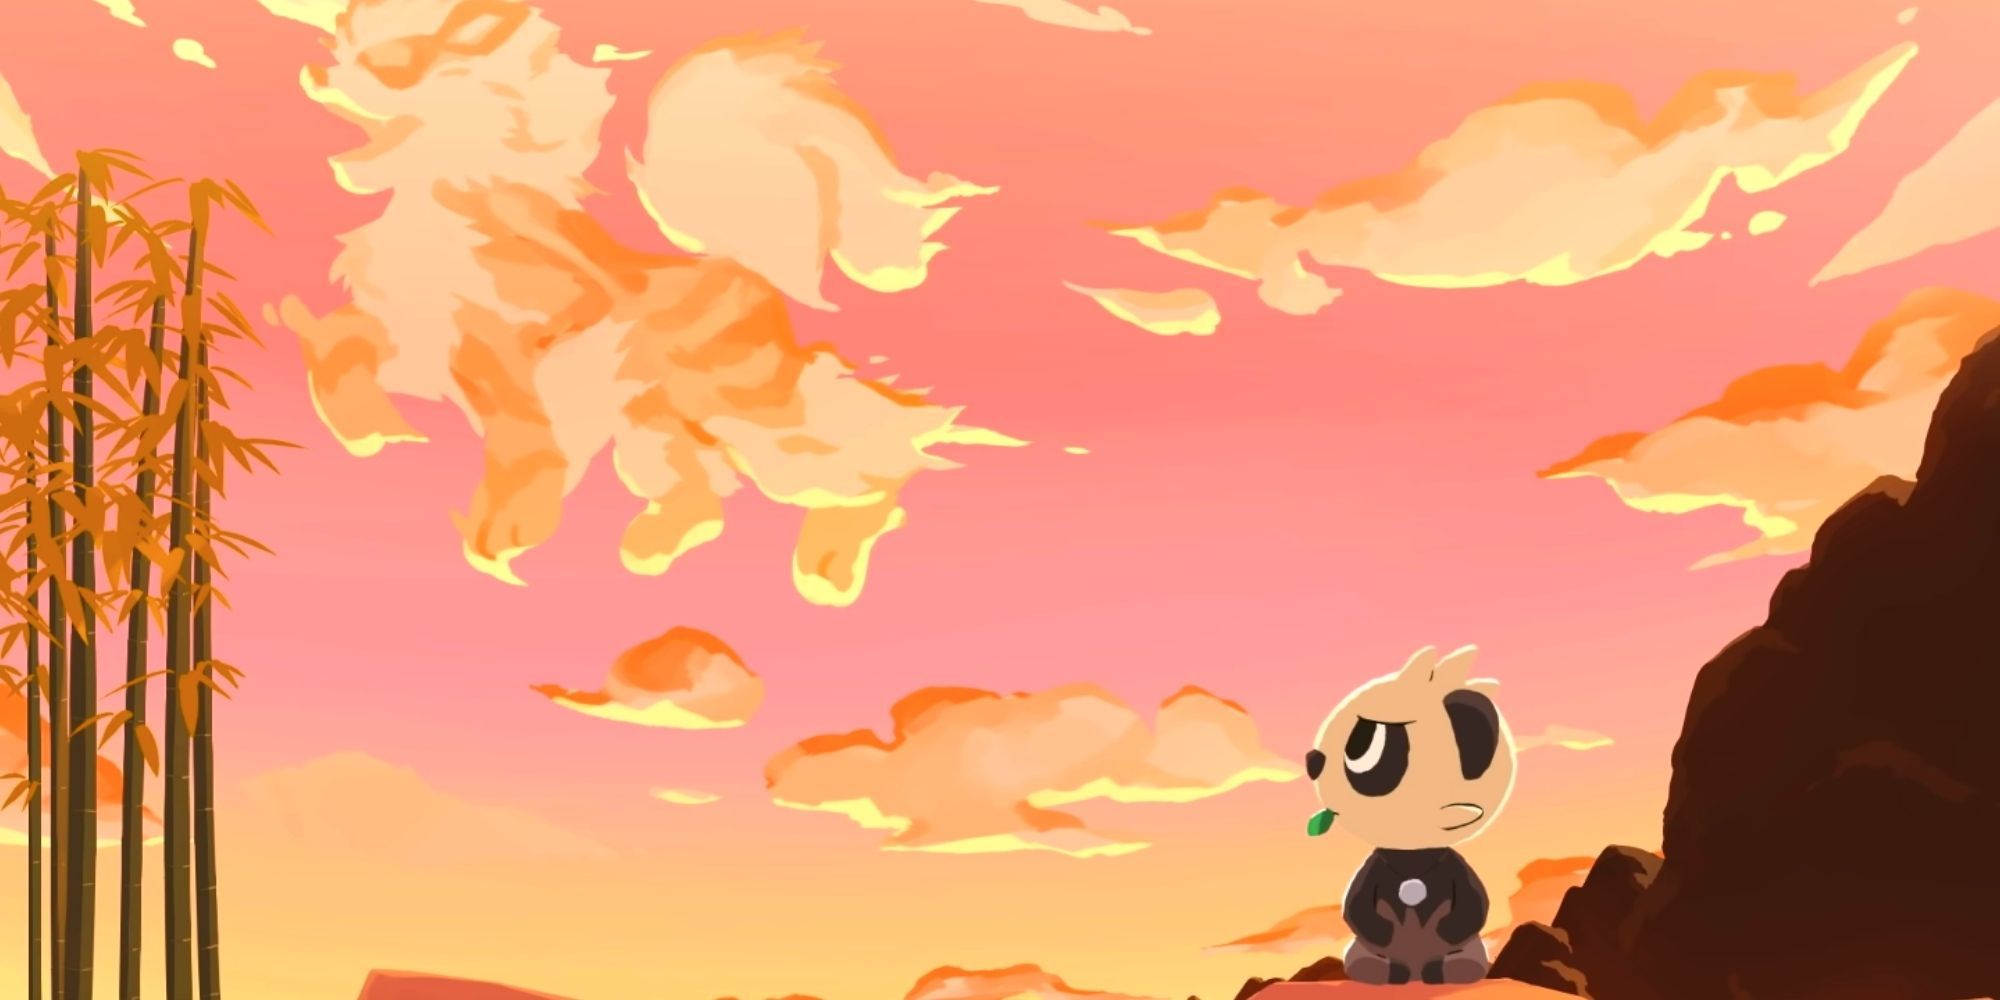 Poketoon: Pancham Looks Up During Sunset At Arcanine Shaped Clouds